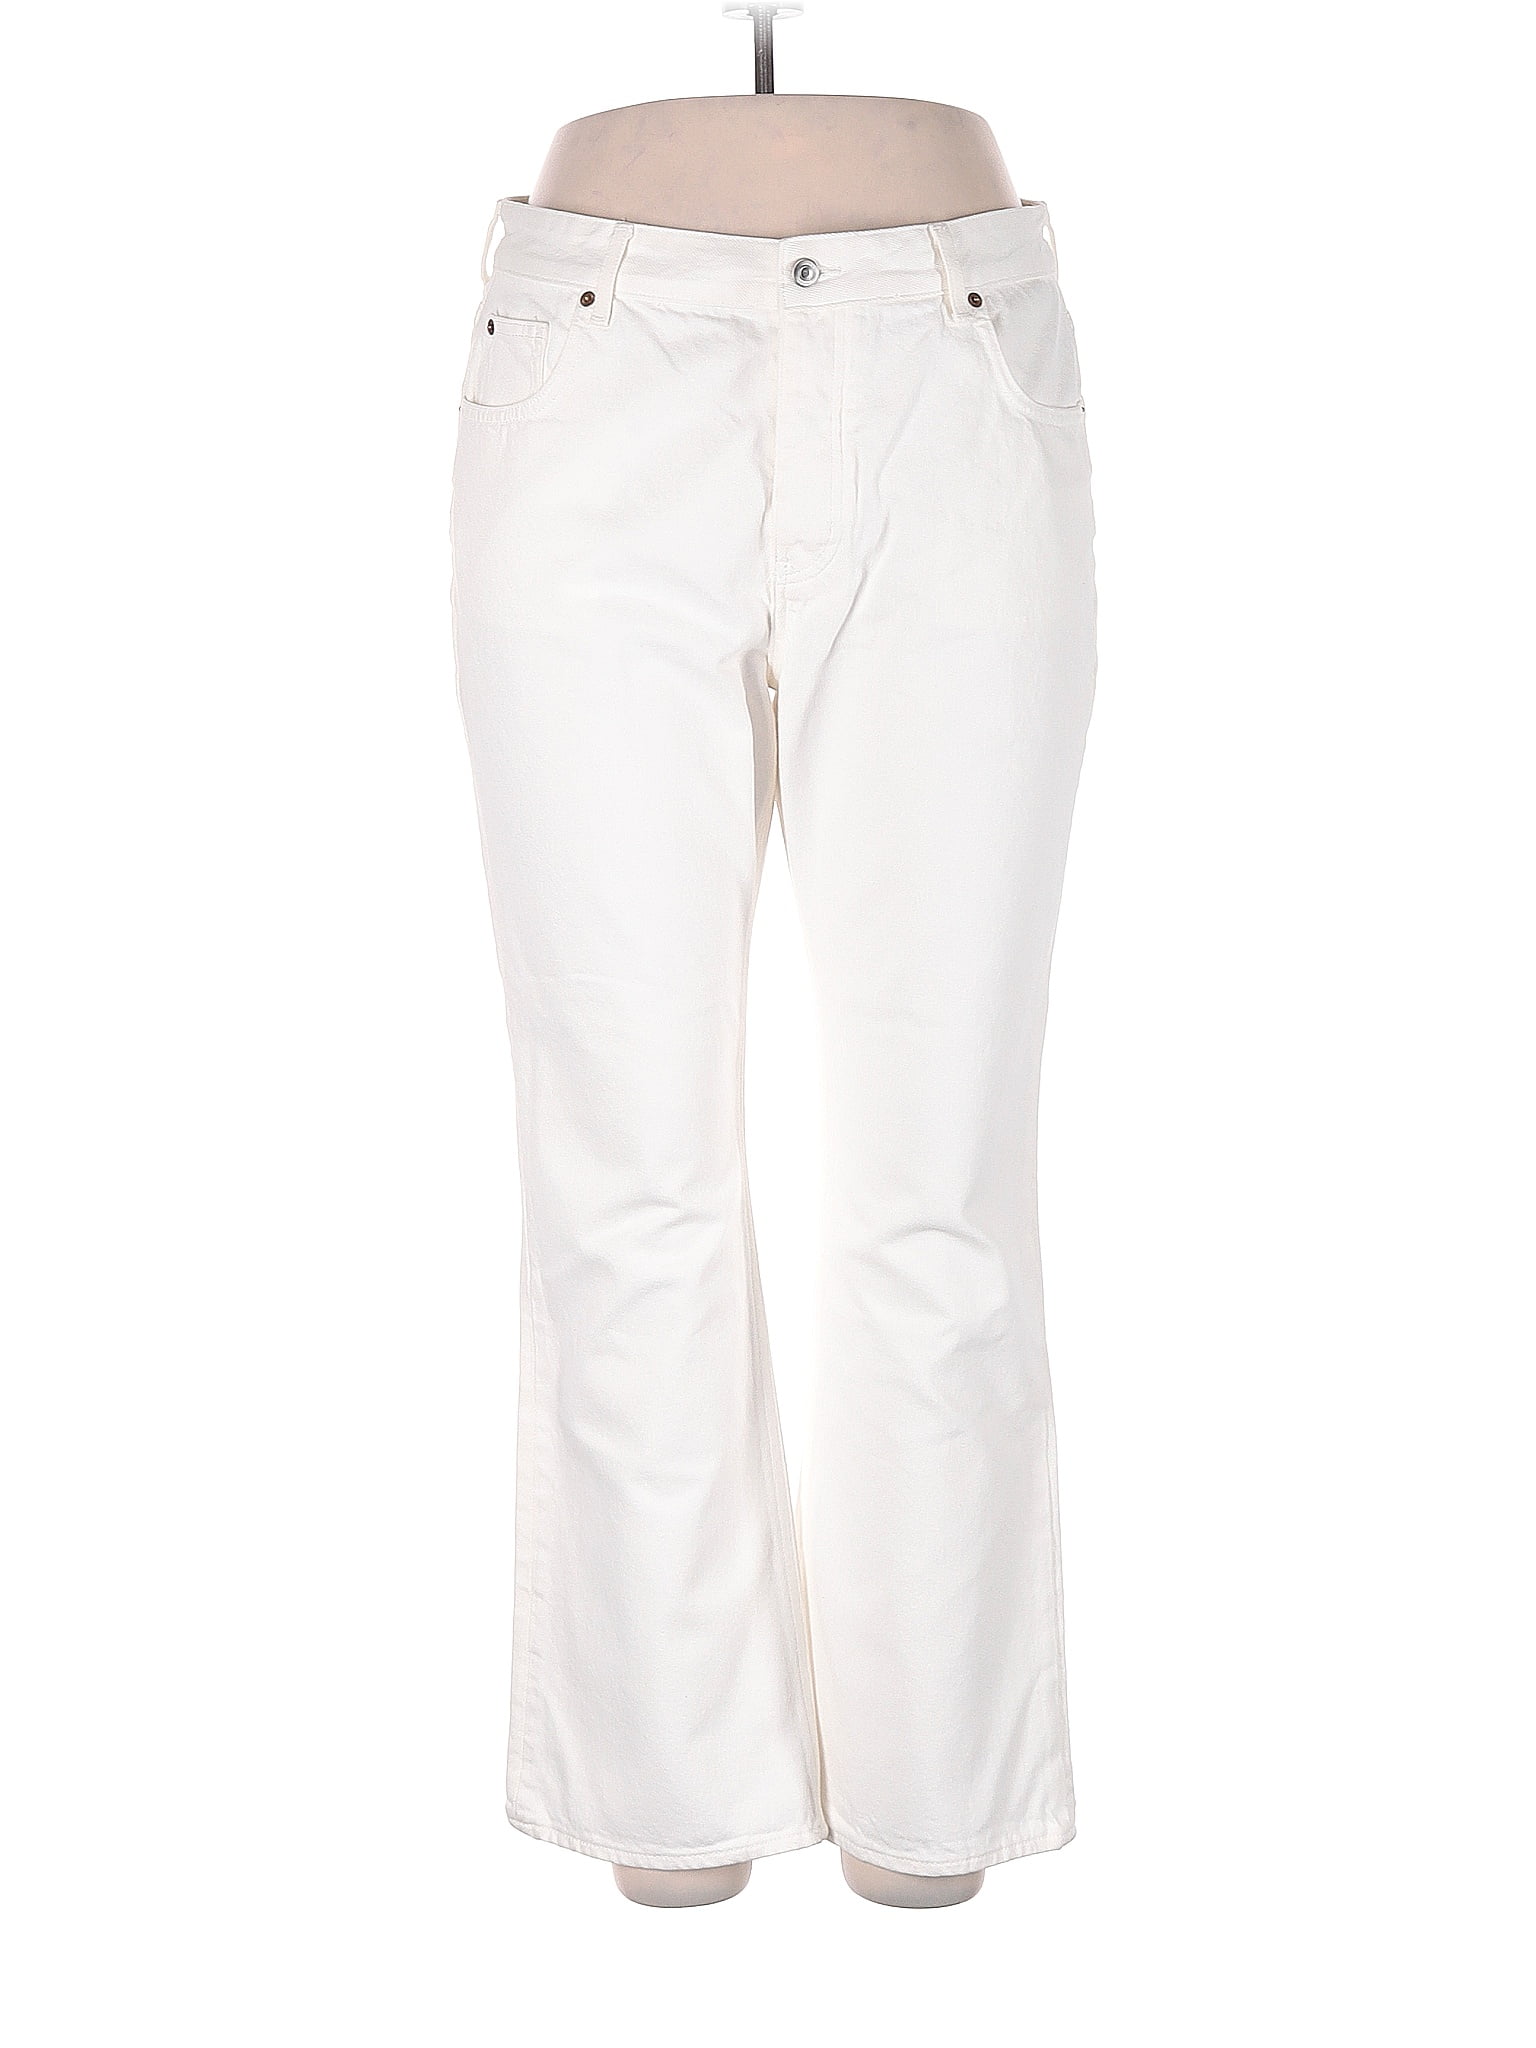 H&M 100% Cotton Solid White Ivory Jeans Size 14 - 46% off | thredUP